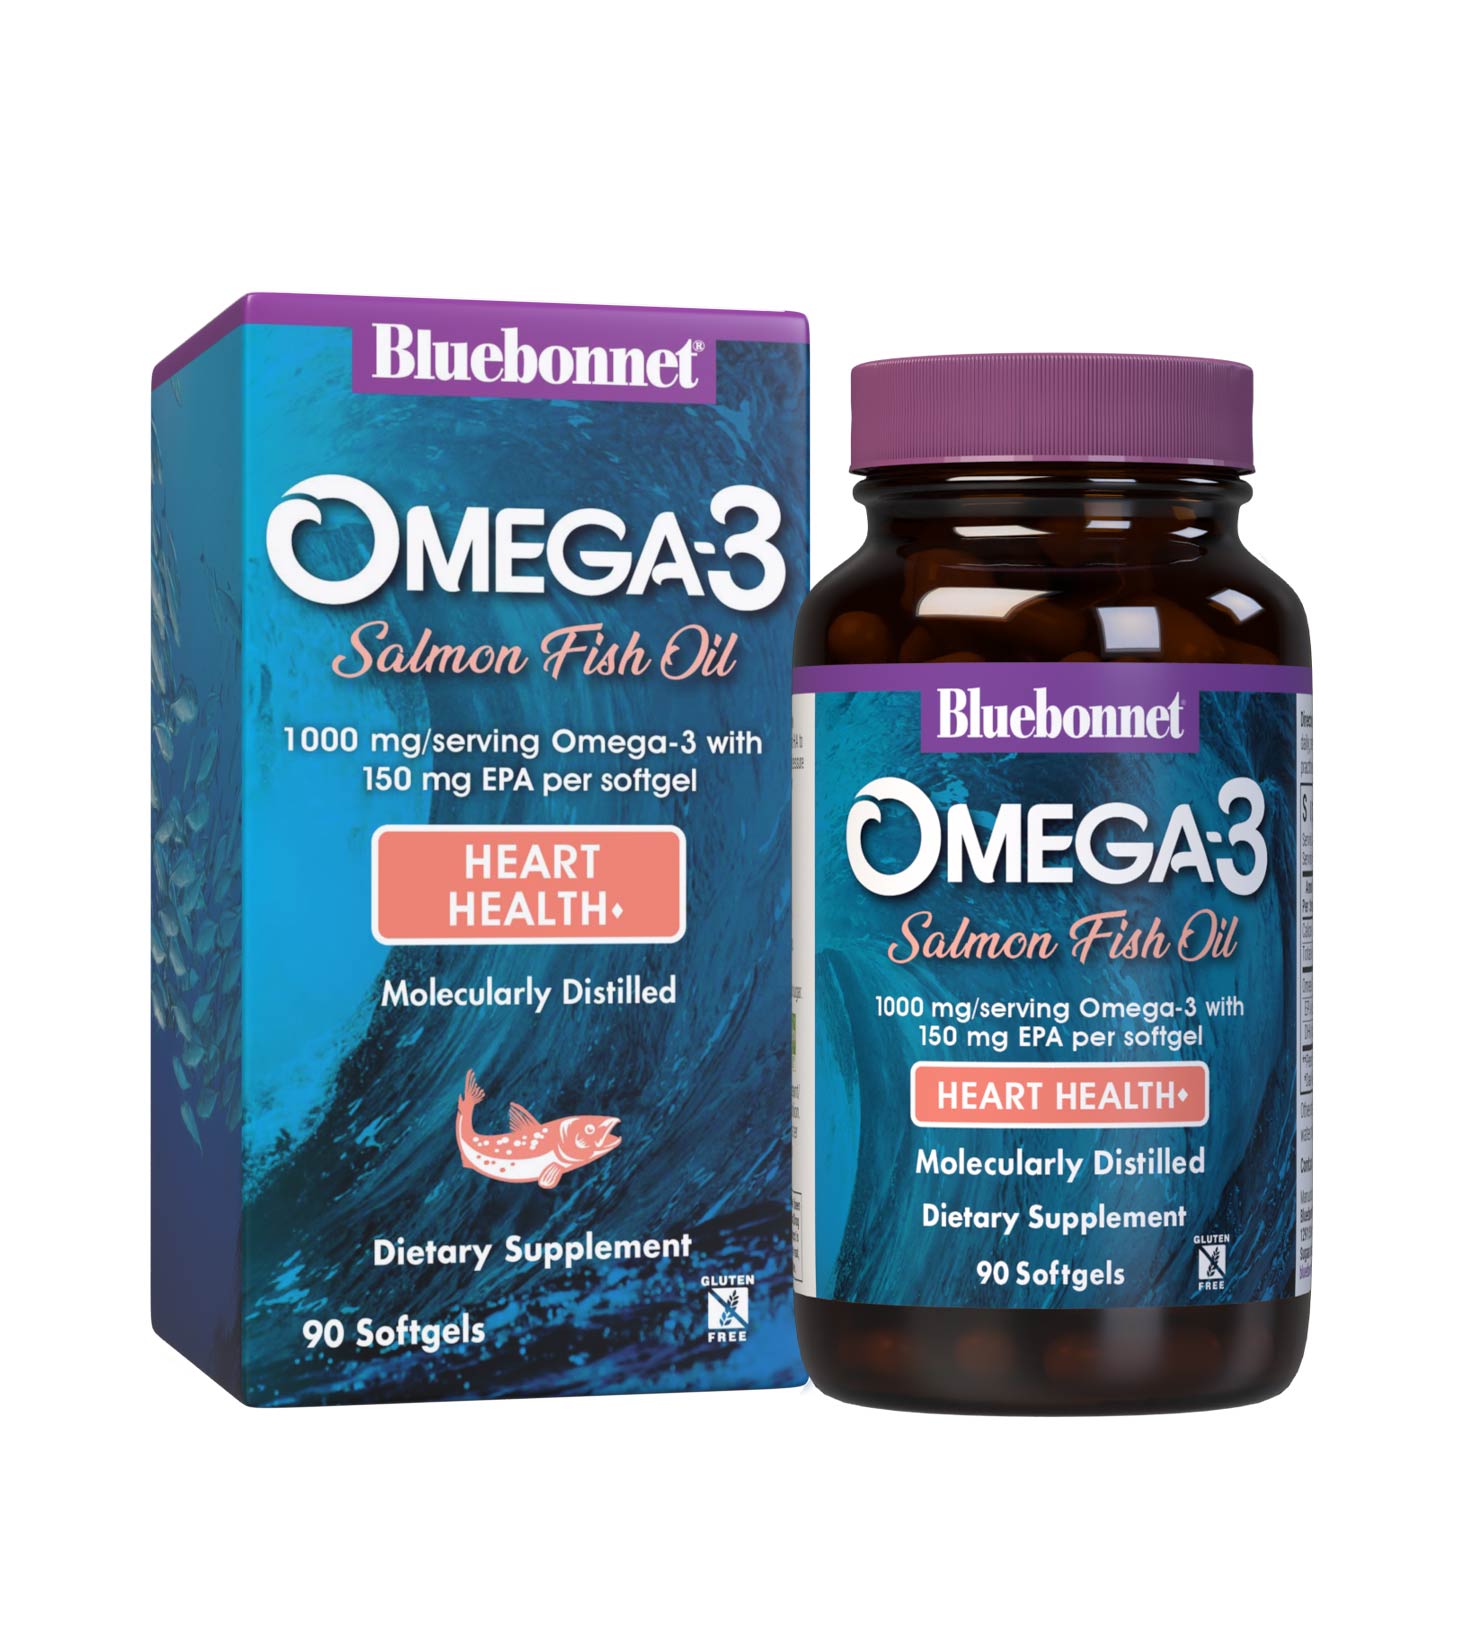 Bluebonnet’s Omega-3 Salmon Oil 90 Softgels are formulated with a specific ratio of EPA and DHA to help support heart health, blood flow, and blood pressure within the normal range by utilizing ultra-refined omega 3-s from salmon fish oil. Bottle with box. #size_90 count